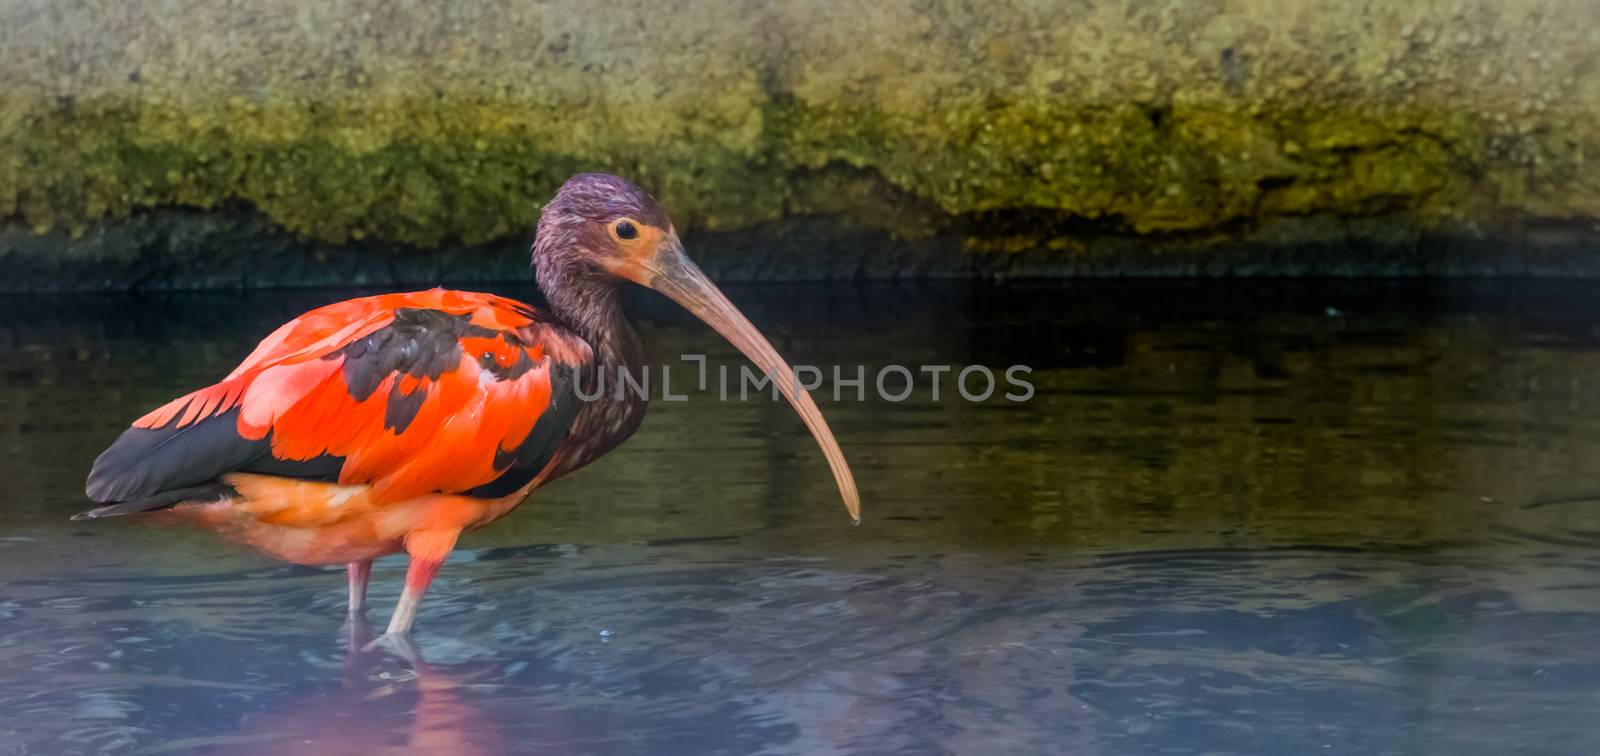 young juvenile red scarlet ibis standing in the water, colorful tropical bird specie from Africa by charlottebleijenberg